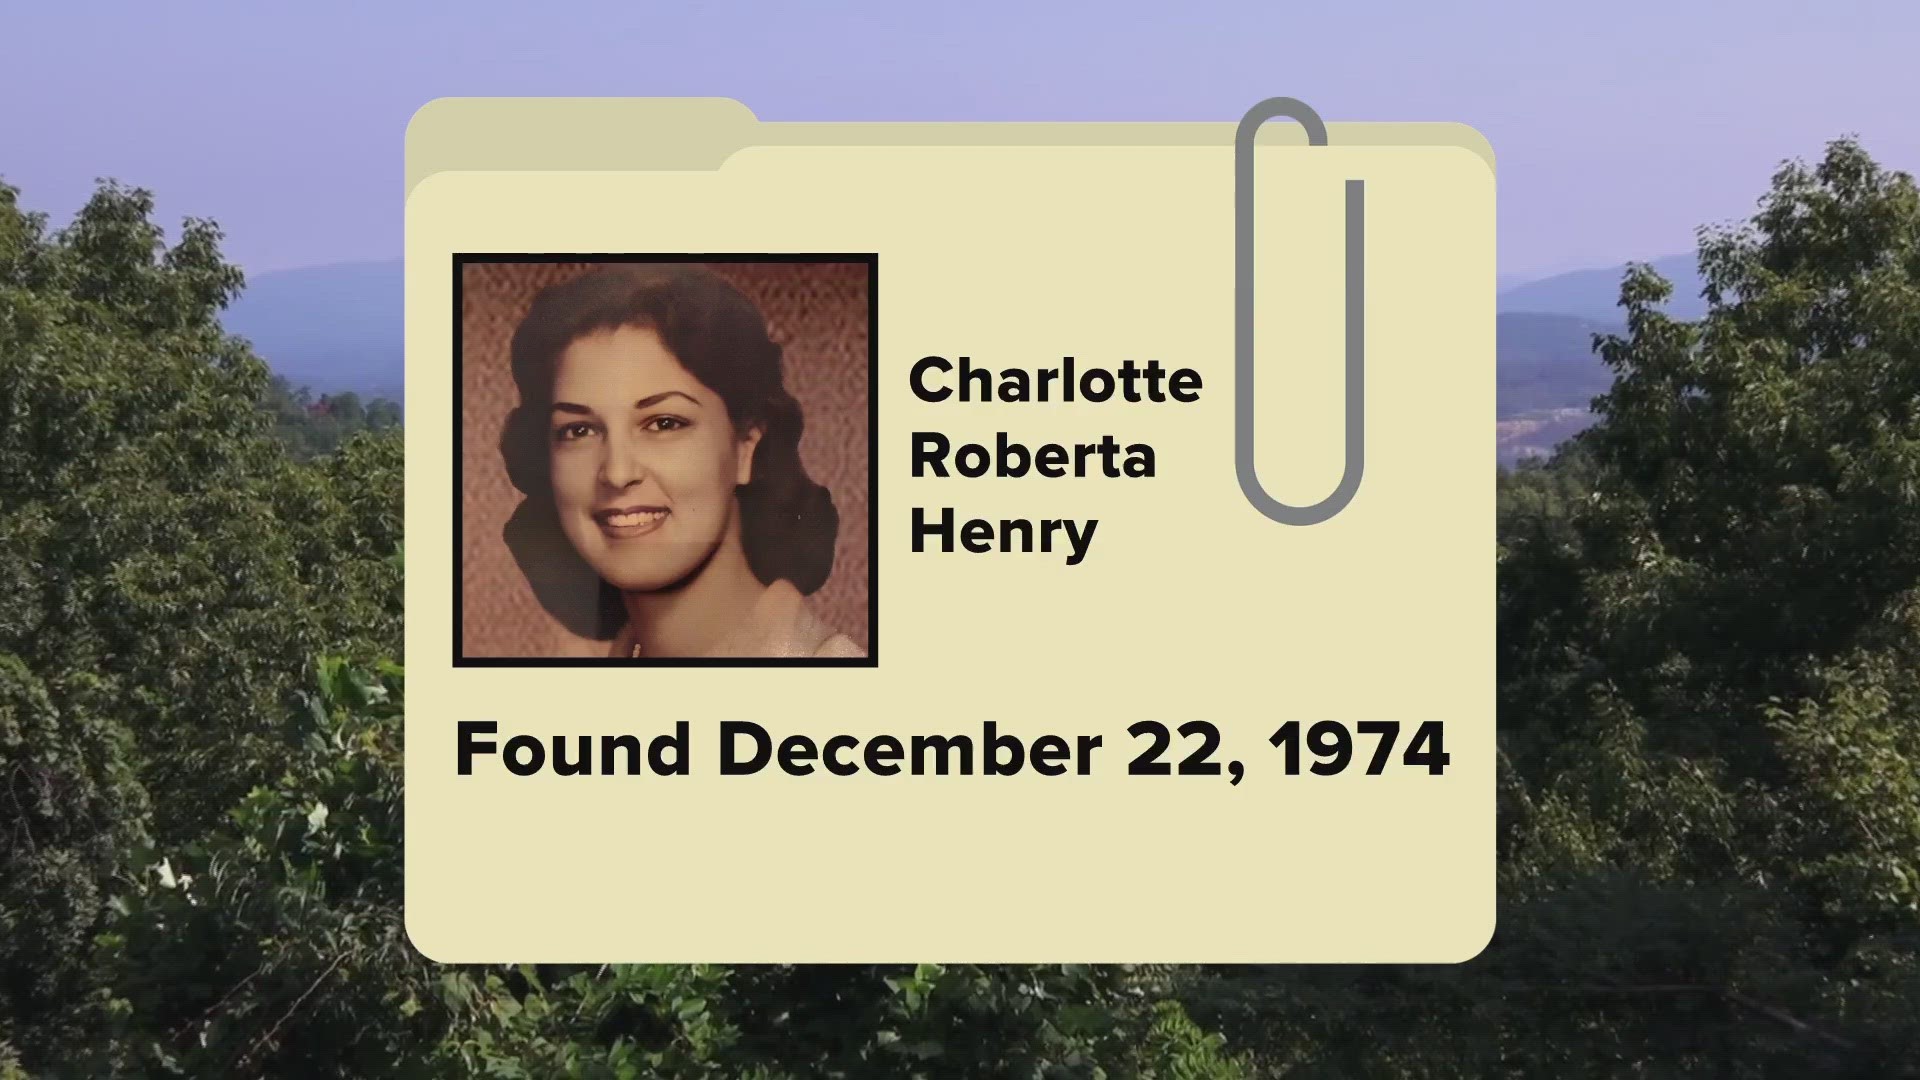 Human remains found back in December 1974 at Ober Gatlinburg have been identified as Charlotte Roberta Henry, according to the city of Gatlinburg.